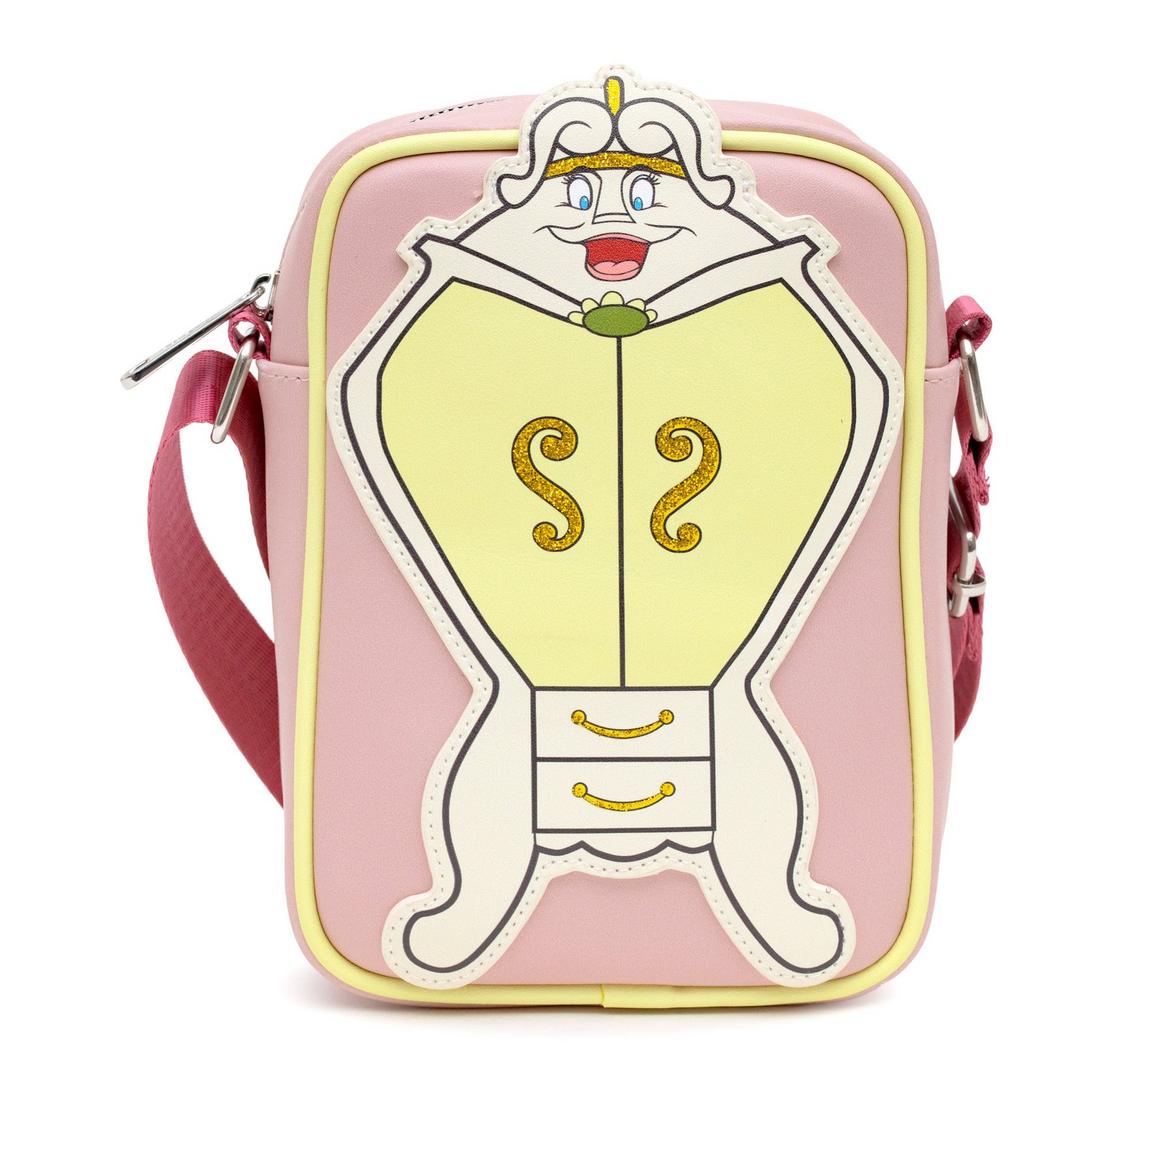 Buckle-Down Disney Beauty and the Beast Polyurethane Crossbody Bag with Piping Edge and Cell Phone Pocket, Size: One Size, Buckle Down